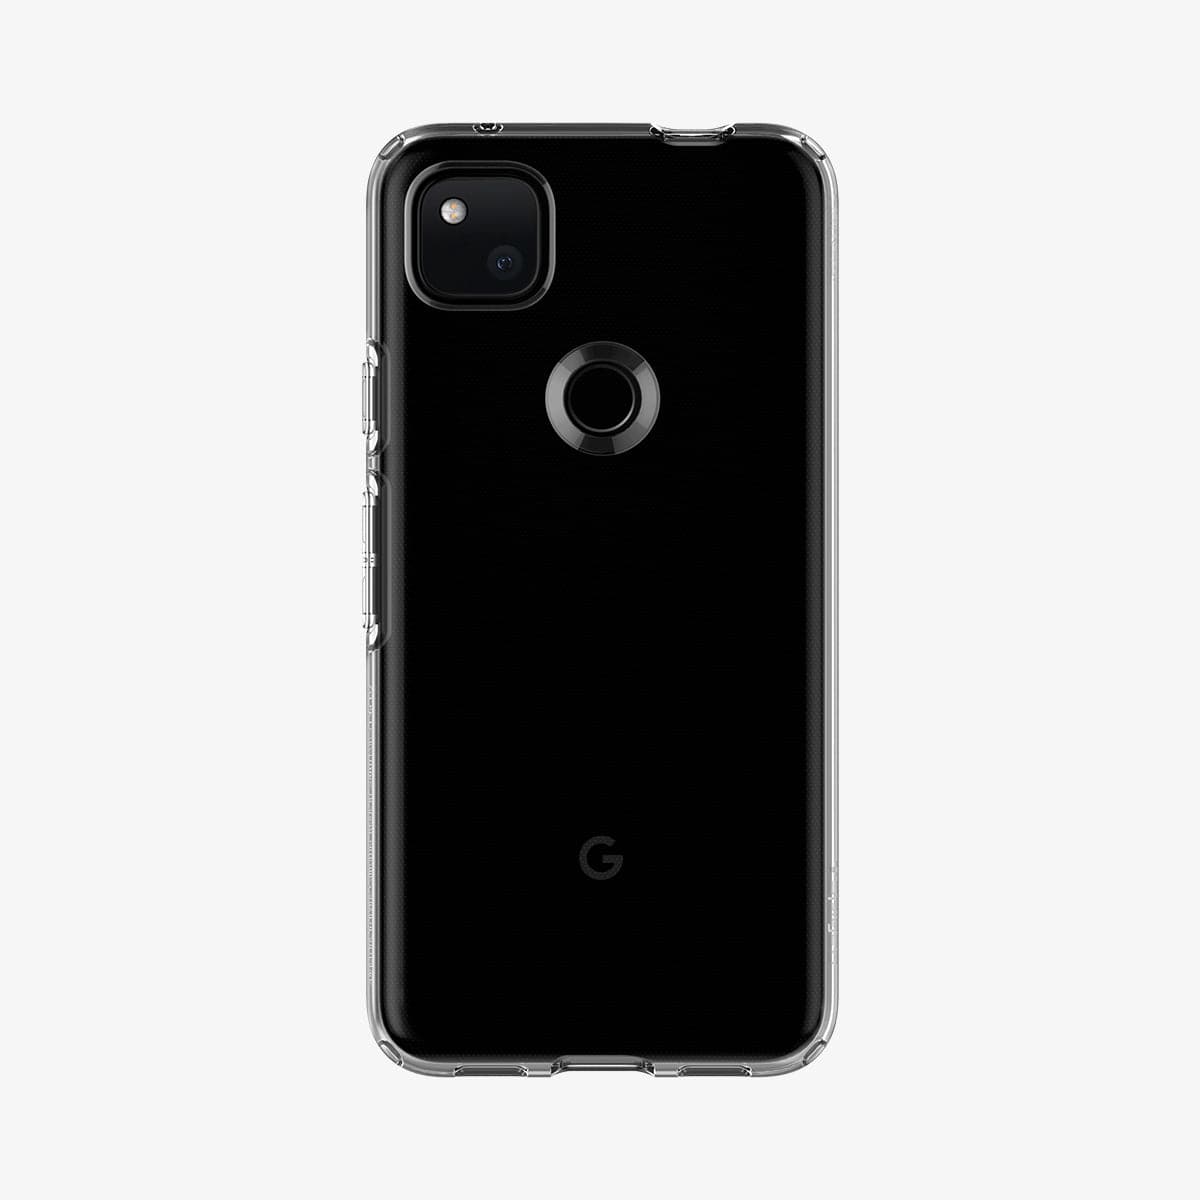 ACS01011 - Pixel 4a Case Liquid Crystal in crystal clear showing the back